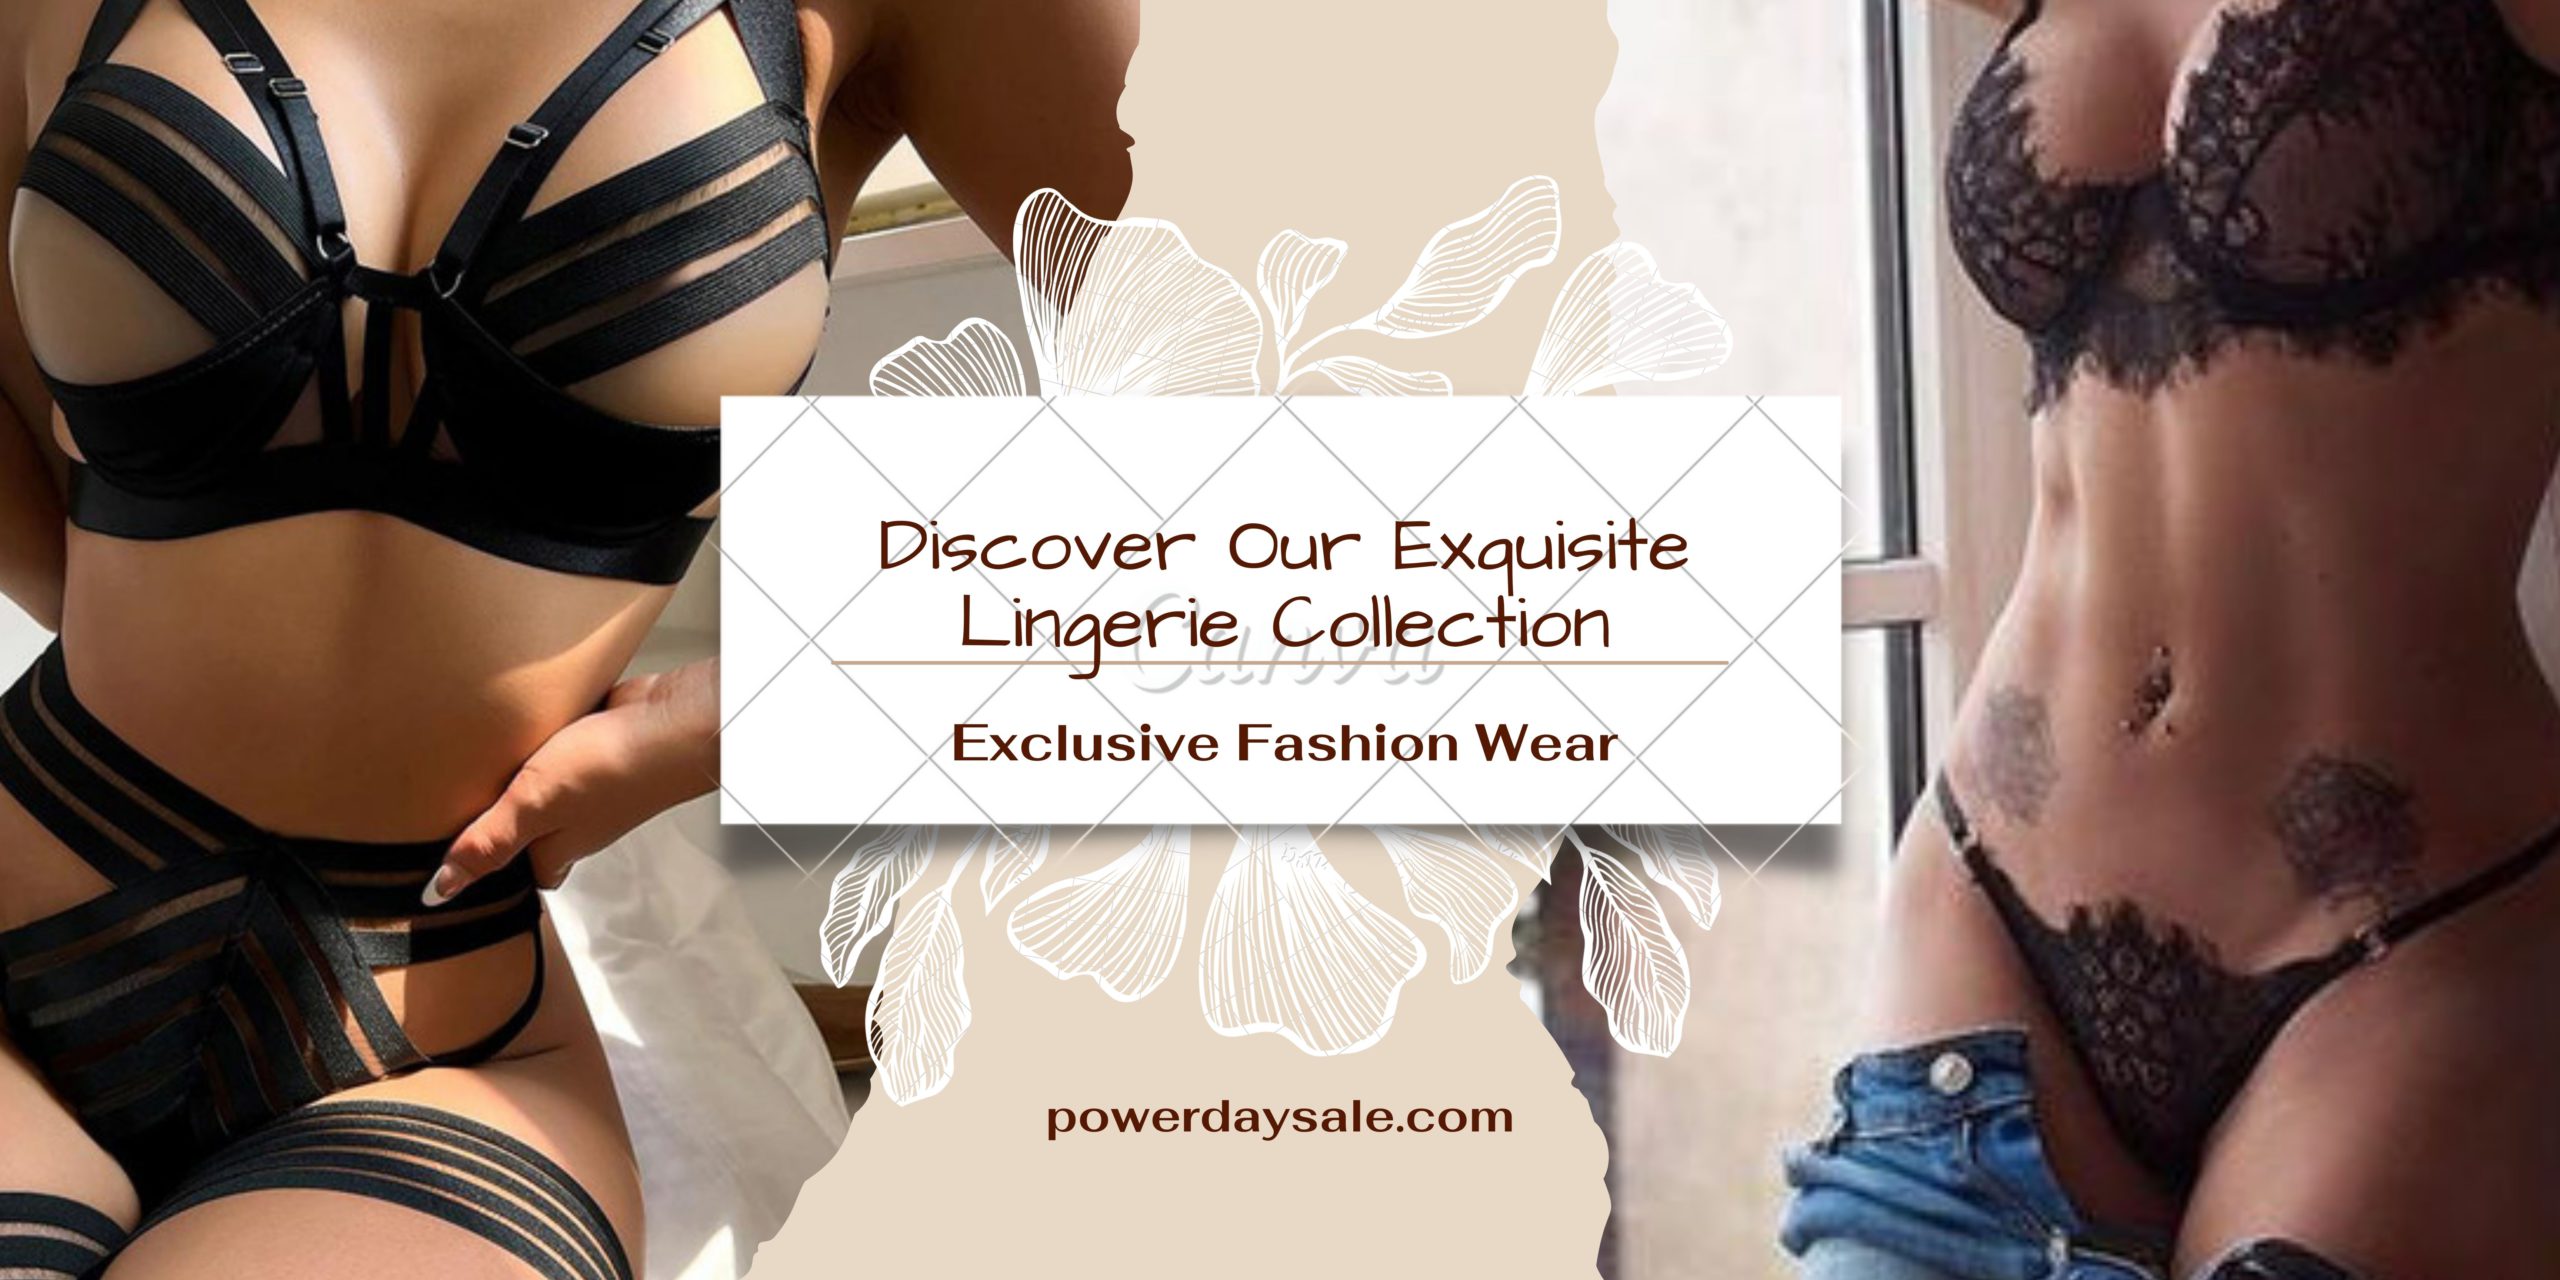 You are currently viewing Discover Our Exquisite Lingerie Collection